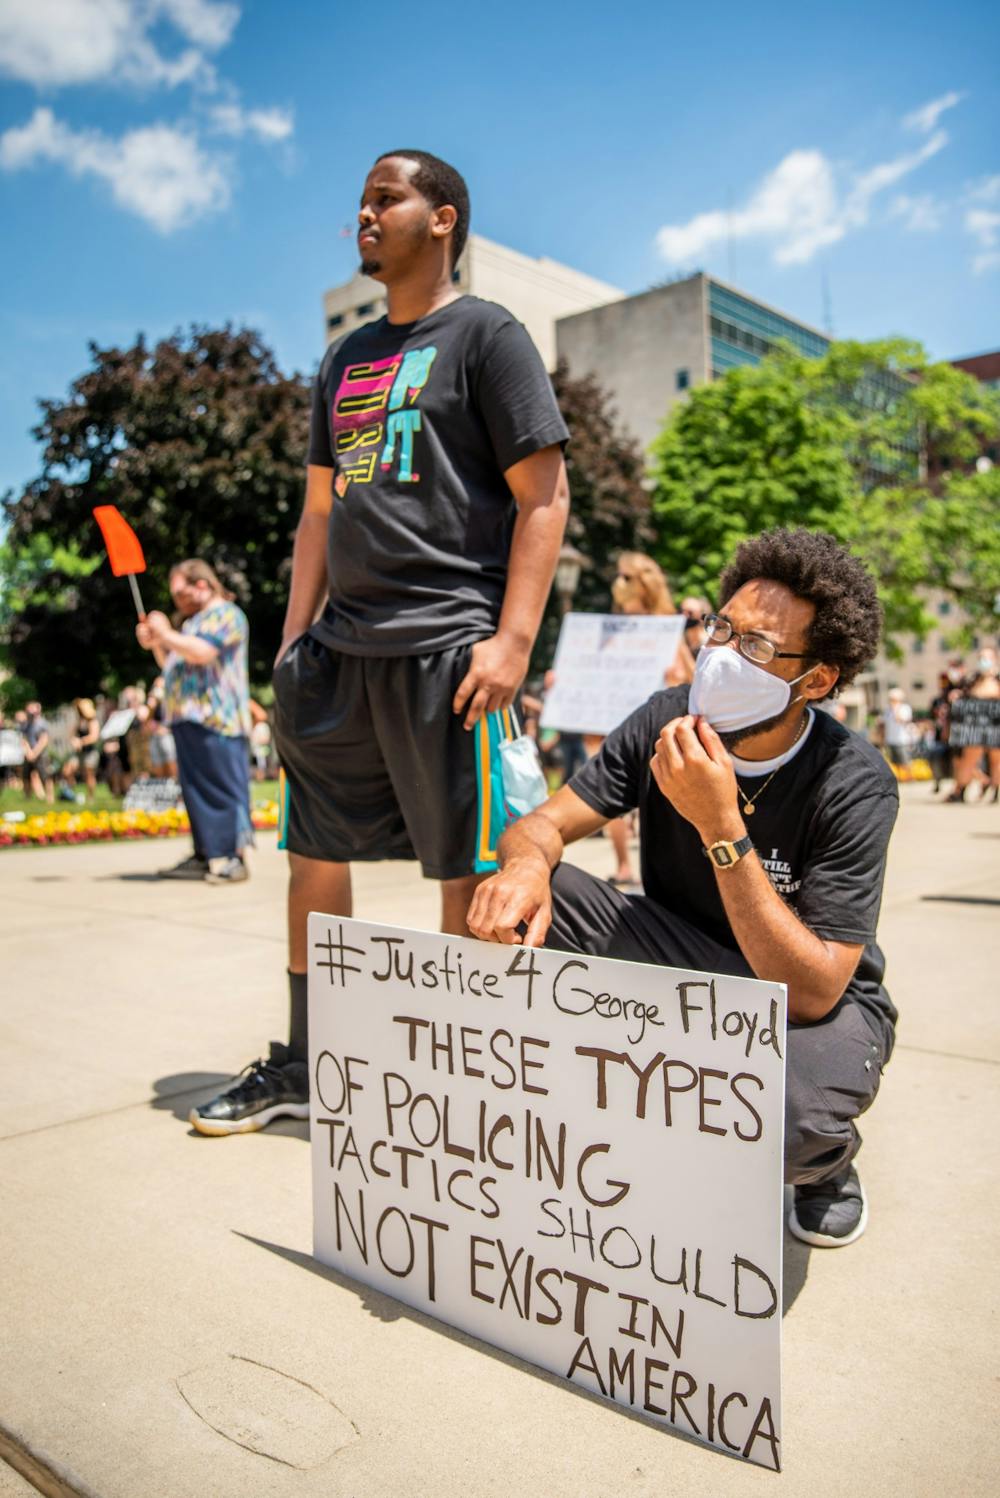 Farhan Sheikh-Omar (left) and Tory Conway (right) listen to speakers at the BLM rally at the Capitol June 29, 2020. Both Sheikh-Omar and Conway have been vocal advocates against police brutality in the Lansing community, speaking at city council meetings and other protests.